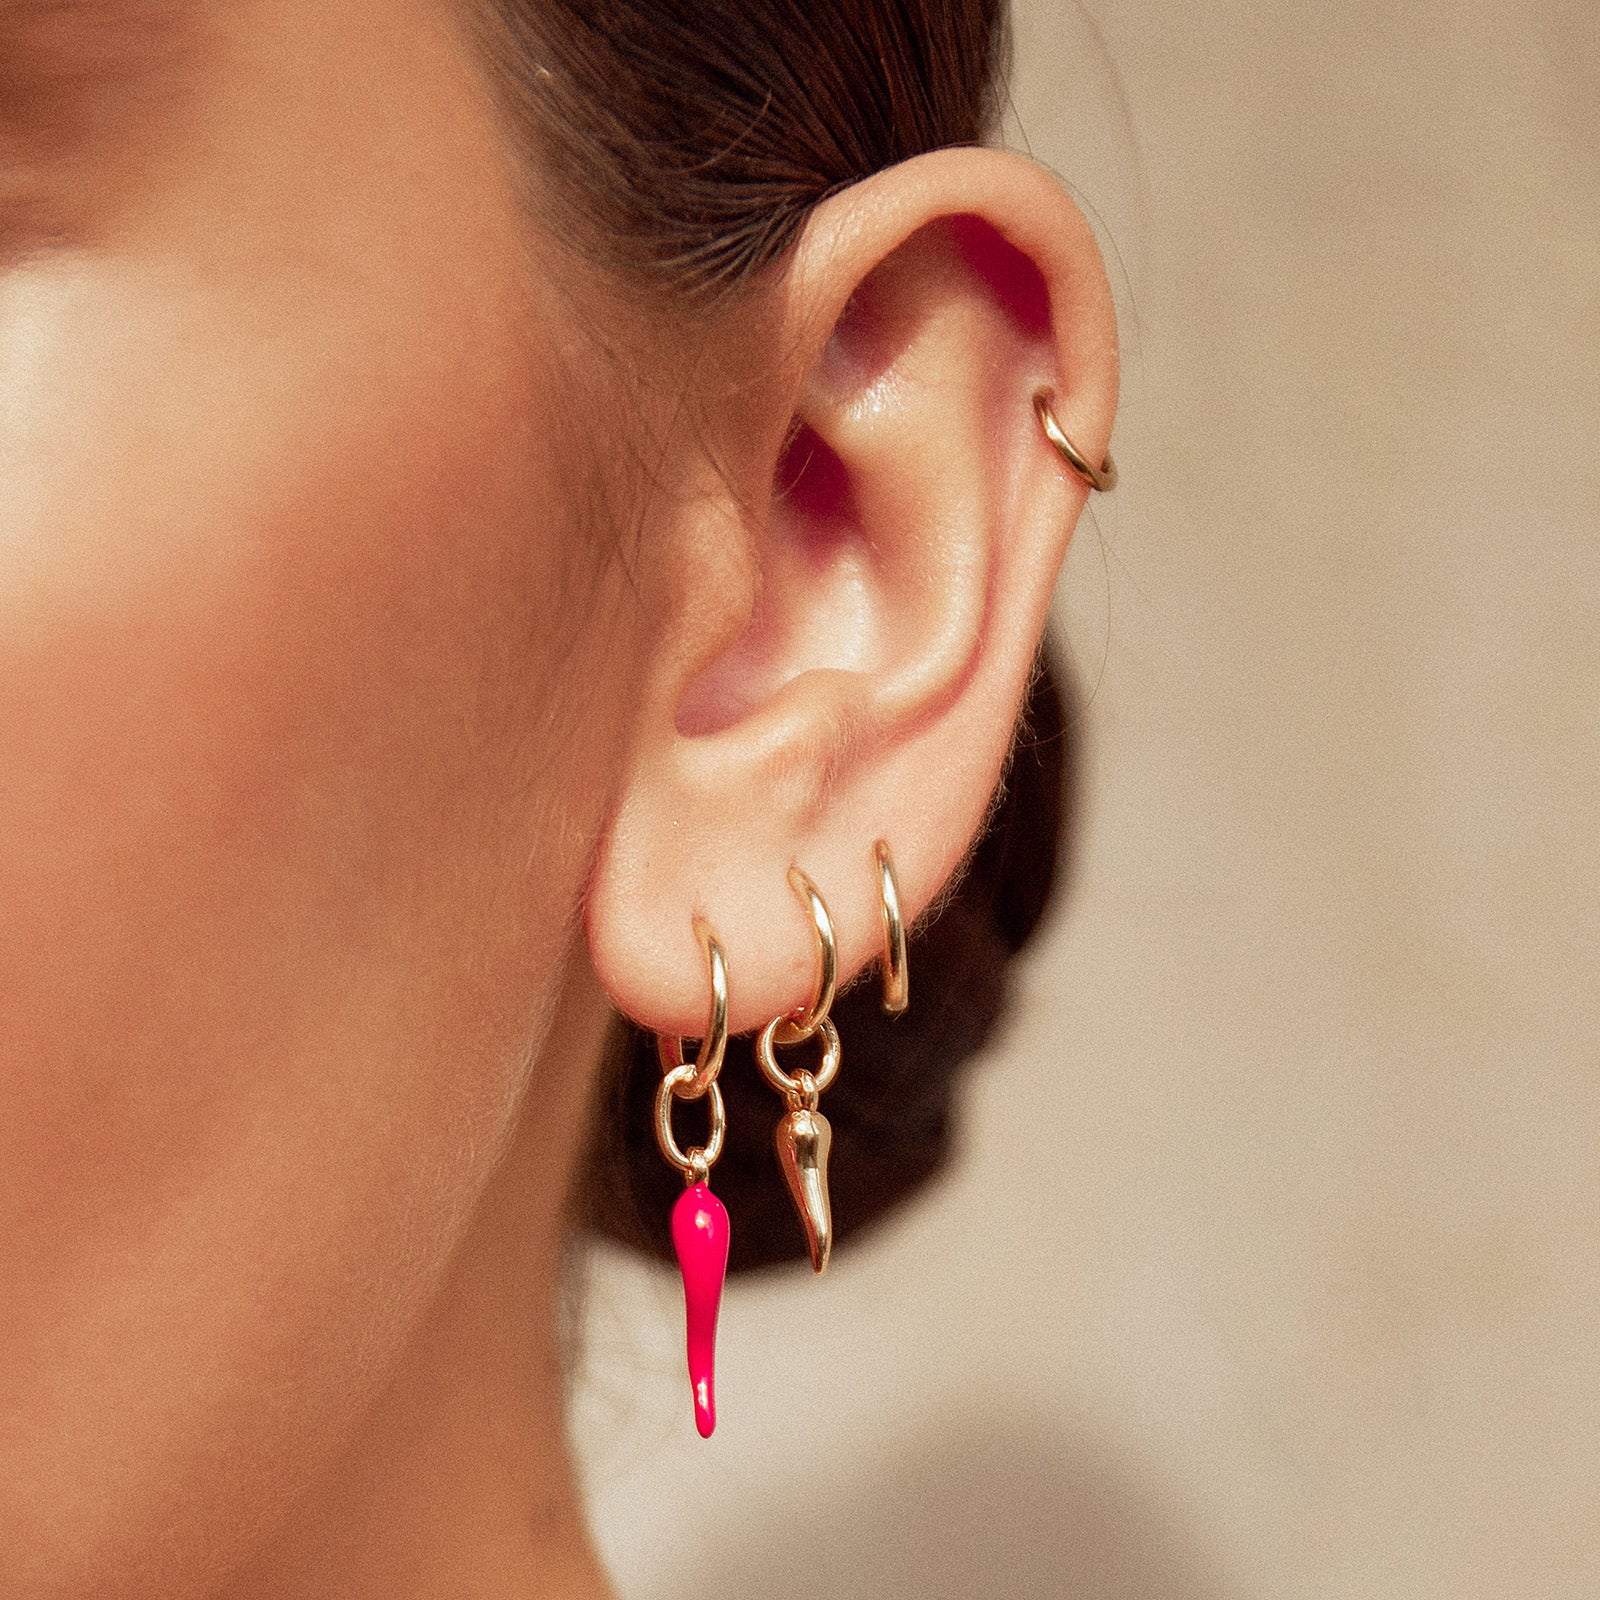 Close-up of woman's ear adorned with multiple piercings and stylish earrings